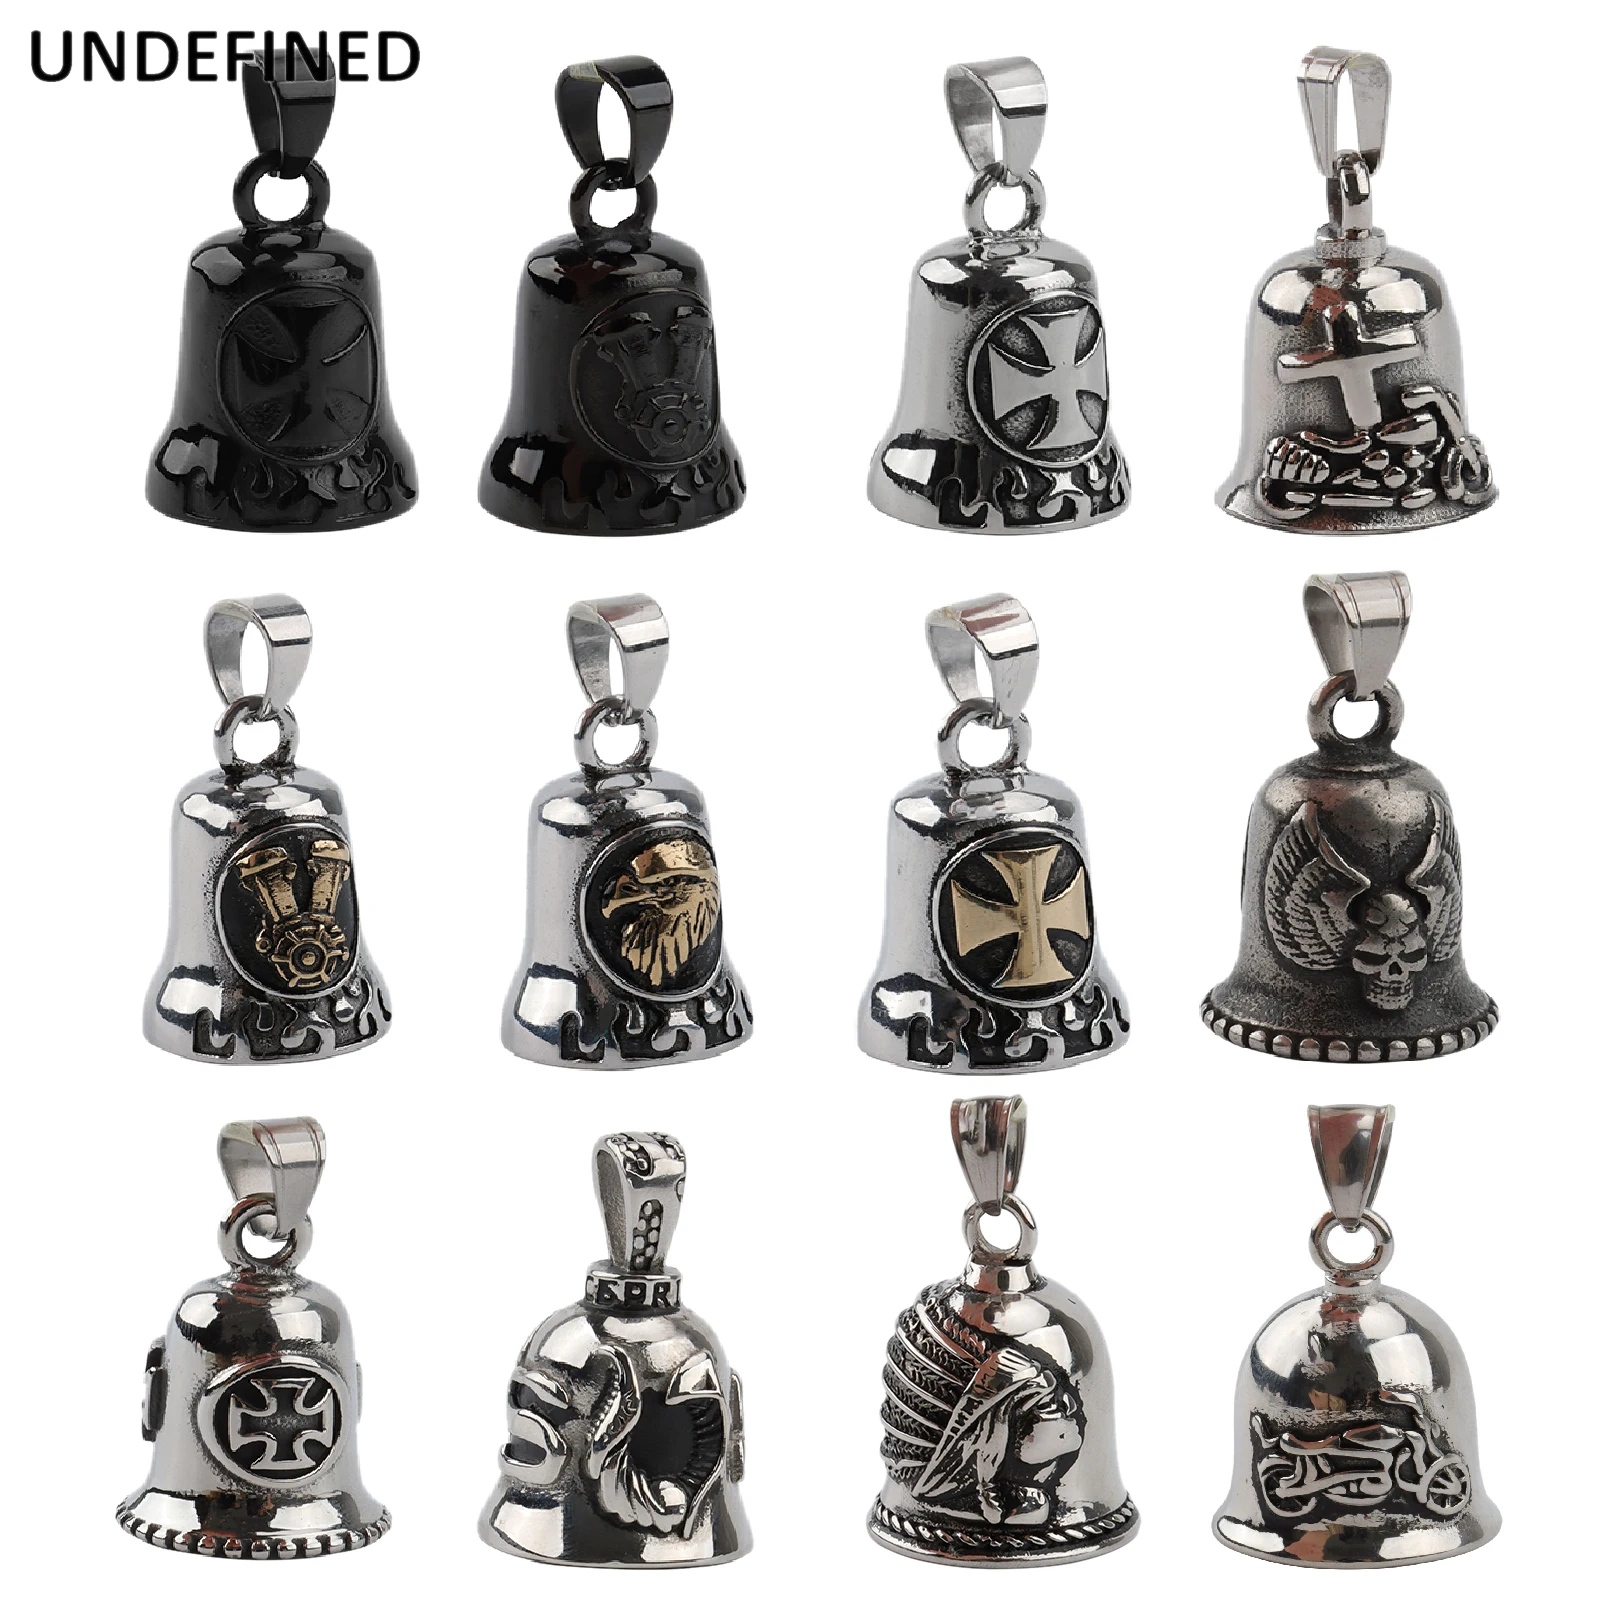 Biker bell skull cross engine eagle stainless steel guard bells for harley indian chief thumb200